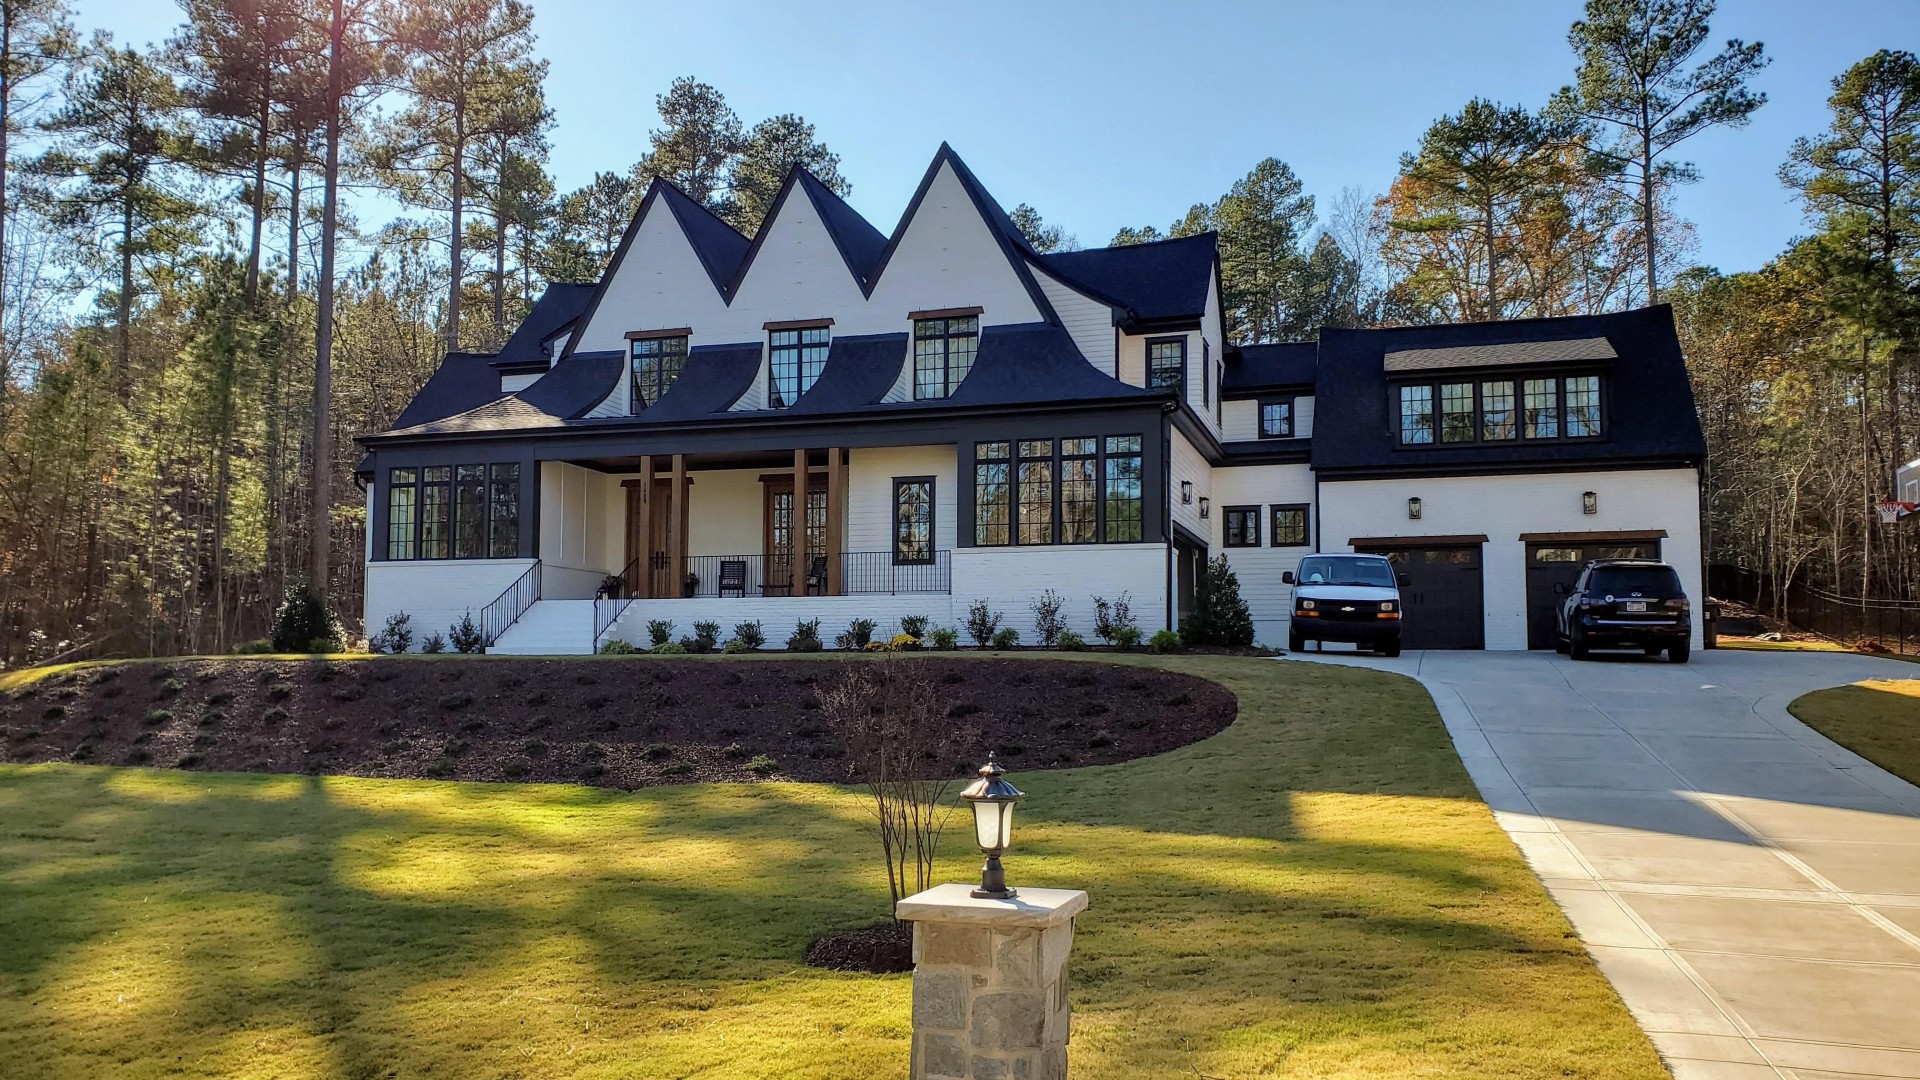 Removing home maintenance stress – That’s Raleigh startup’s mission